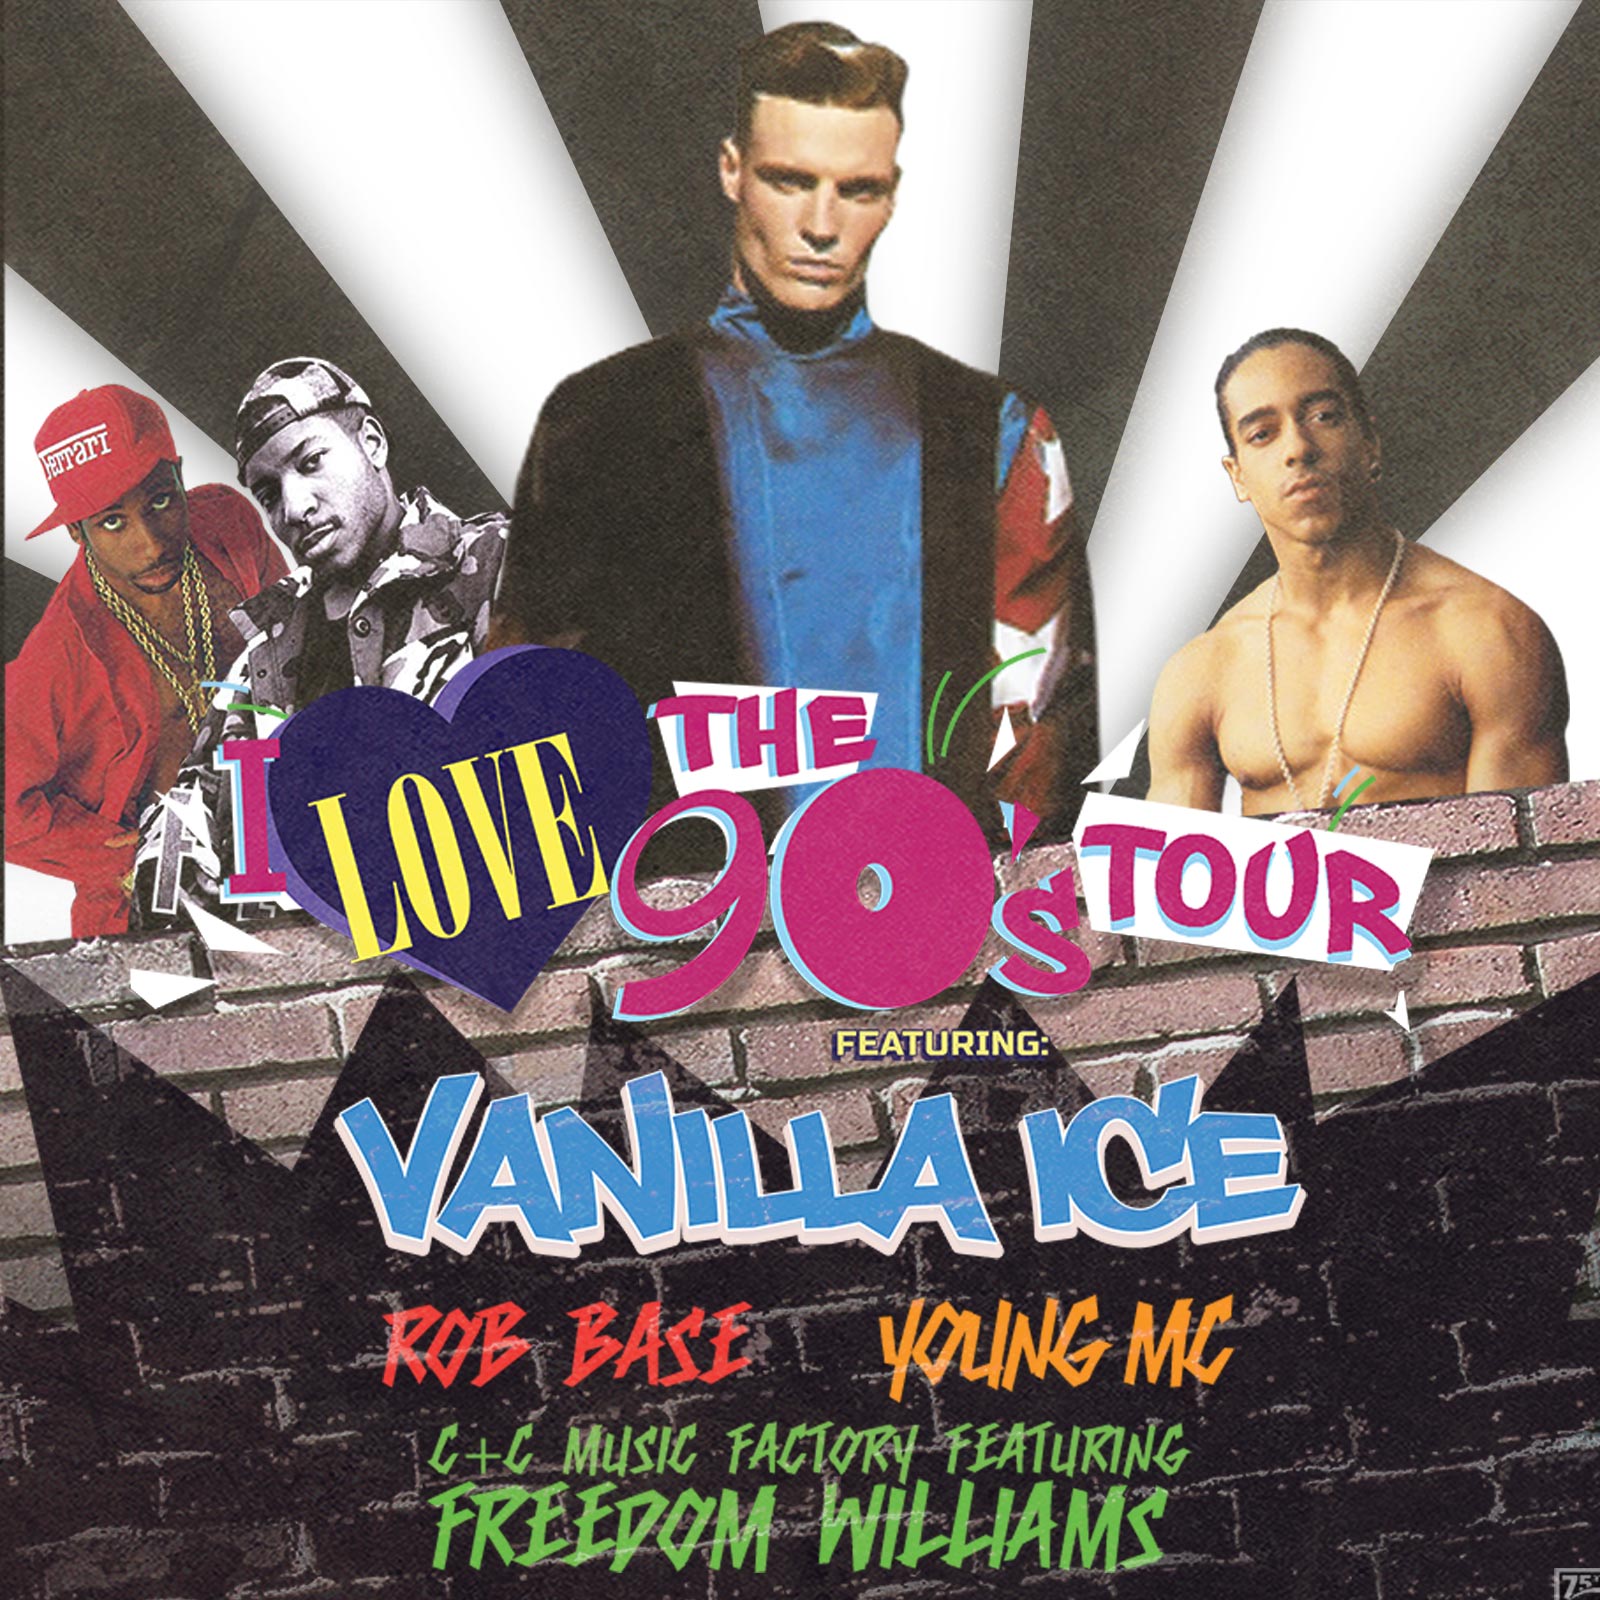 `I Love The 90's Tour` graphic provided by Fallsview Casino Resort